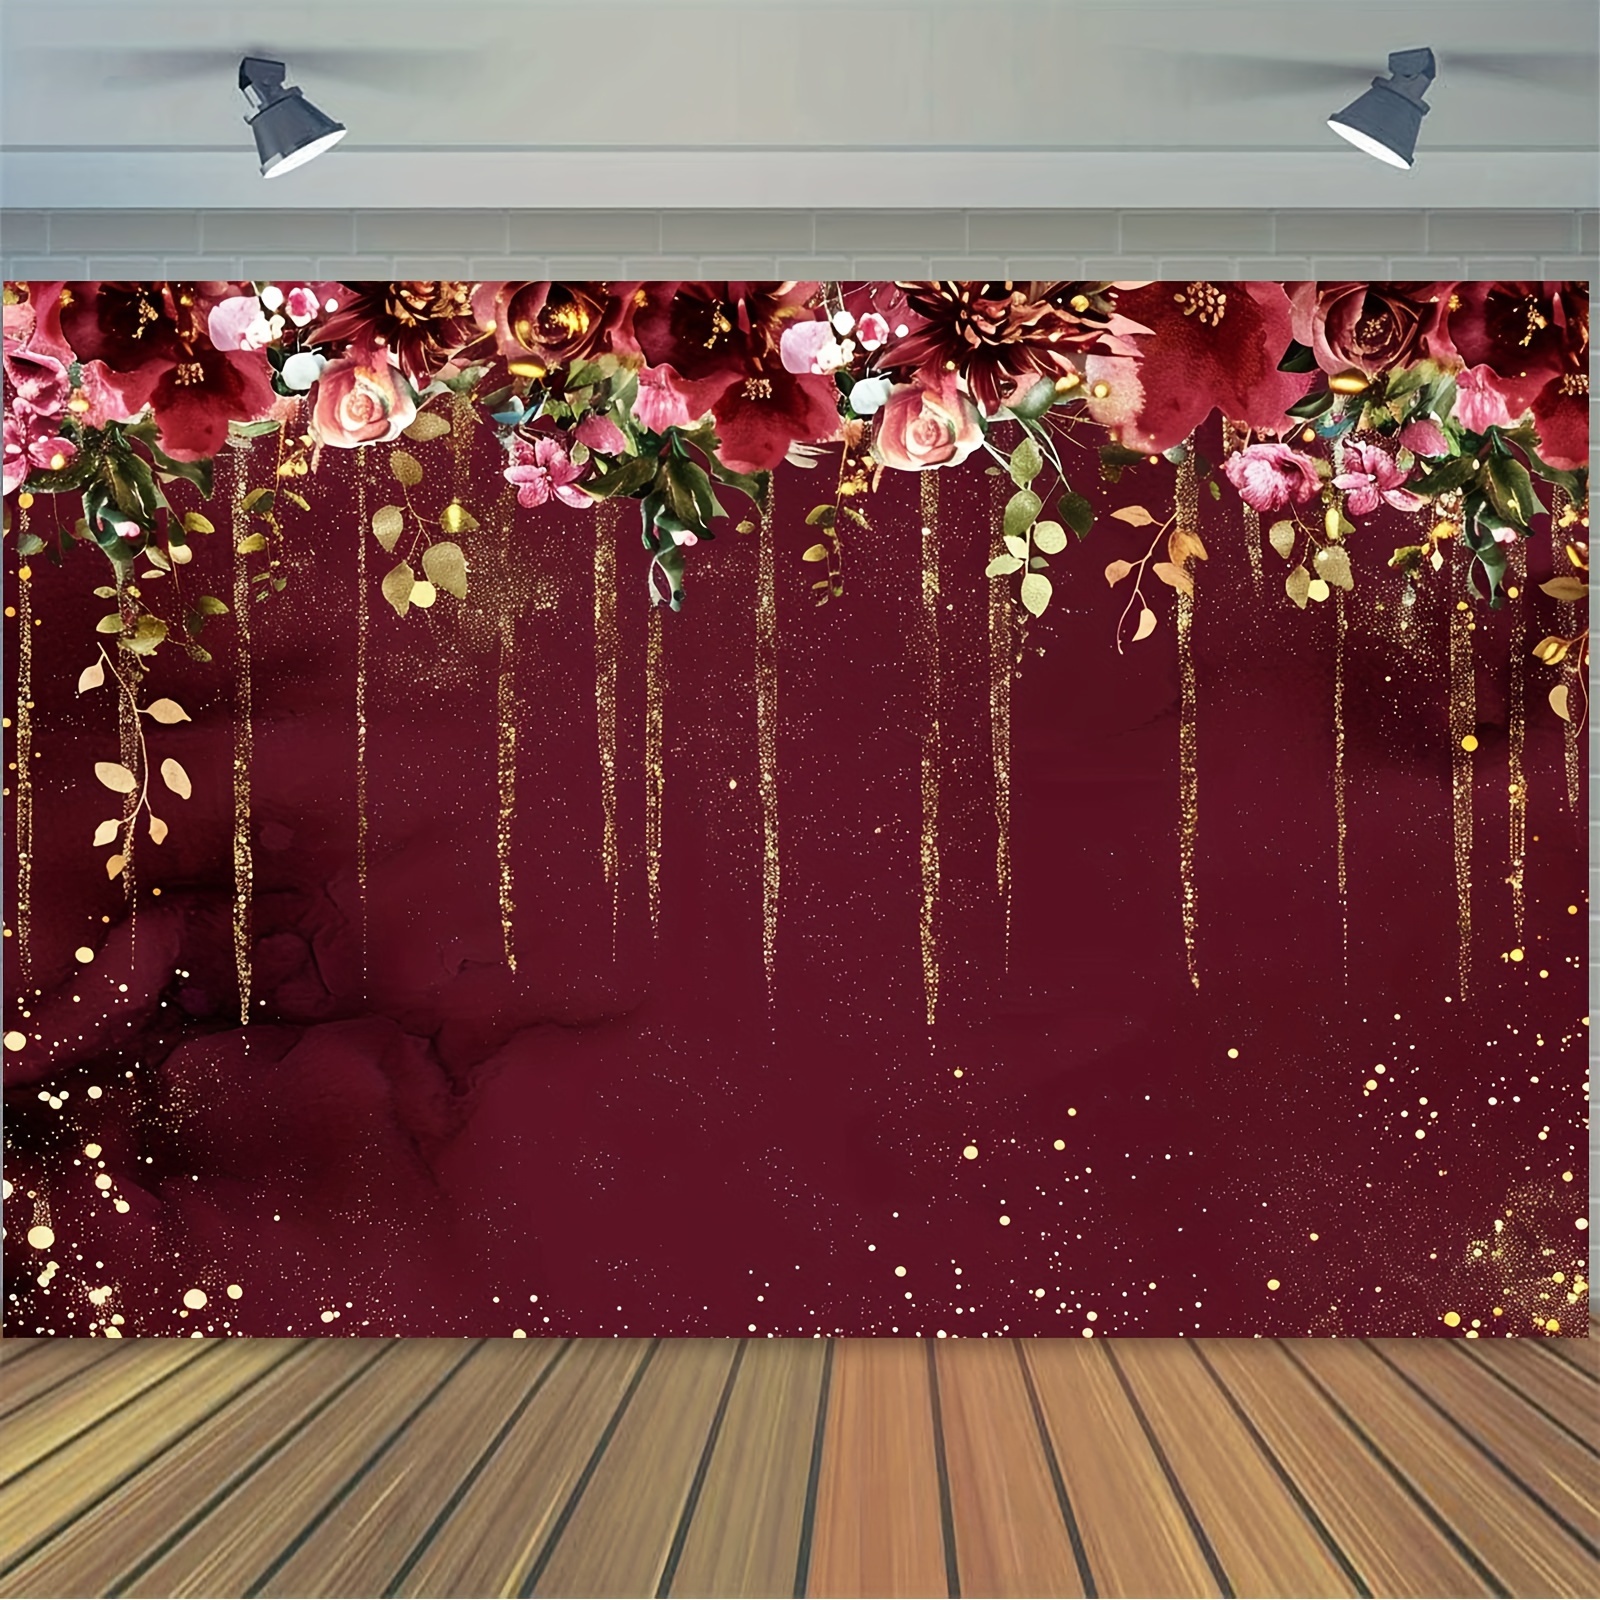 

5x3ft Burgundy Red Roses Flower Wall Backdrop Banner For Wedding, Bridal Shower, Birthday, Multipurpose Room & Garden Decor - Vinyl Material, No Electricity Needed, Ideal For Indoor & Outdoor Use